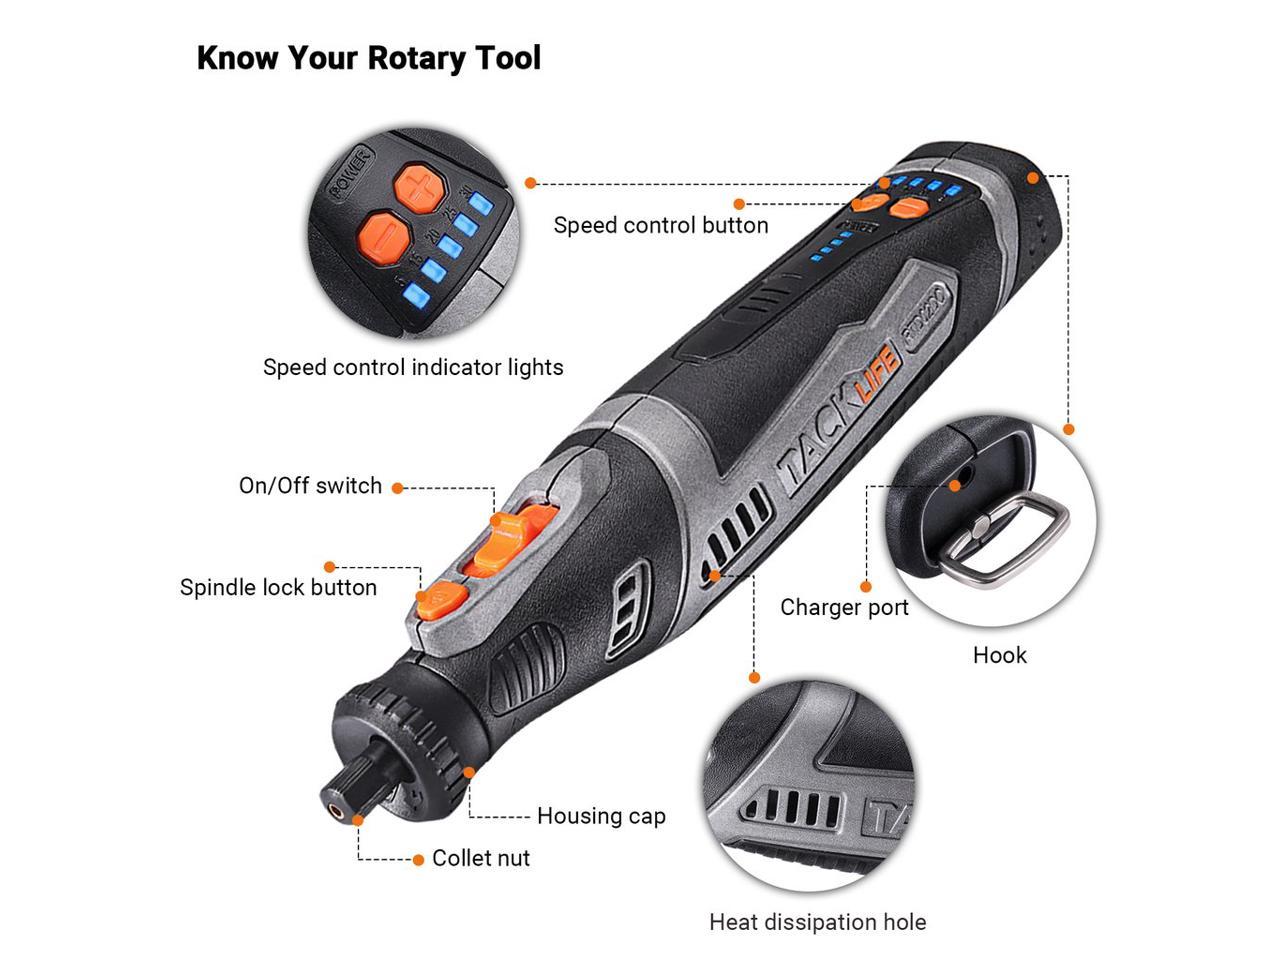 TACKLIFE RTD02DC - Cordless rotary tool 8V Motor 2.0 Ah Li-ion Battery with 43 Accessories, Long Endurance home/home other Rotary Tool